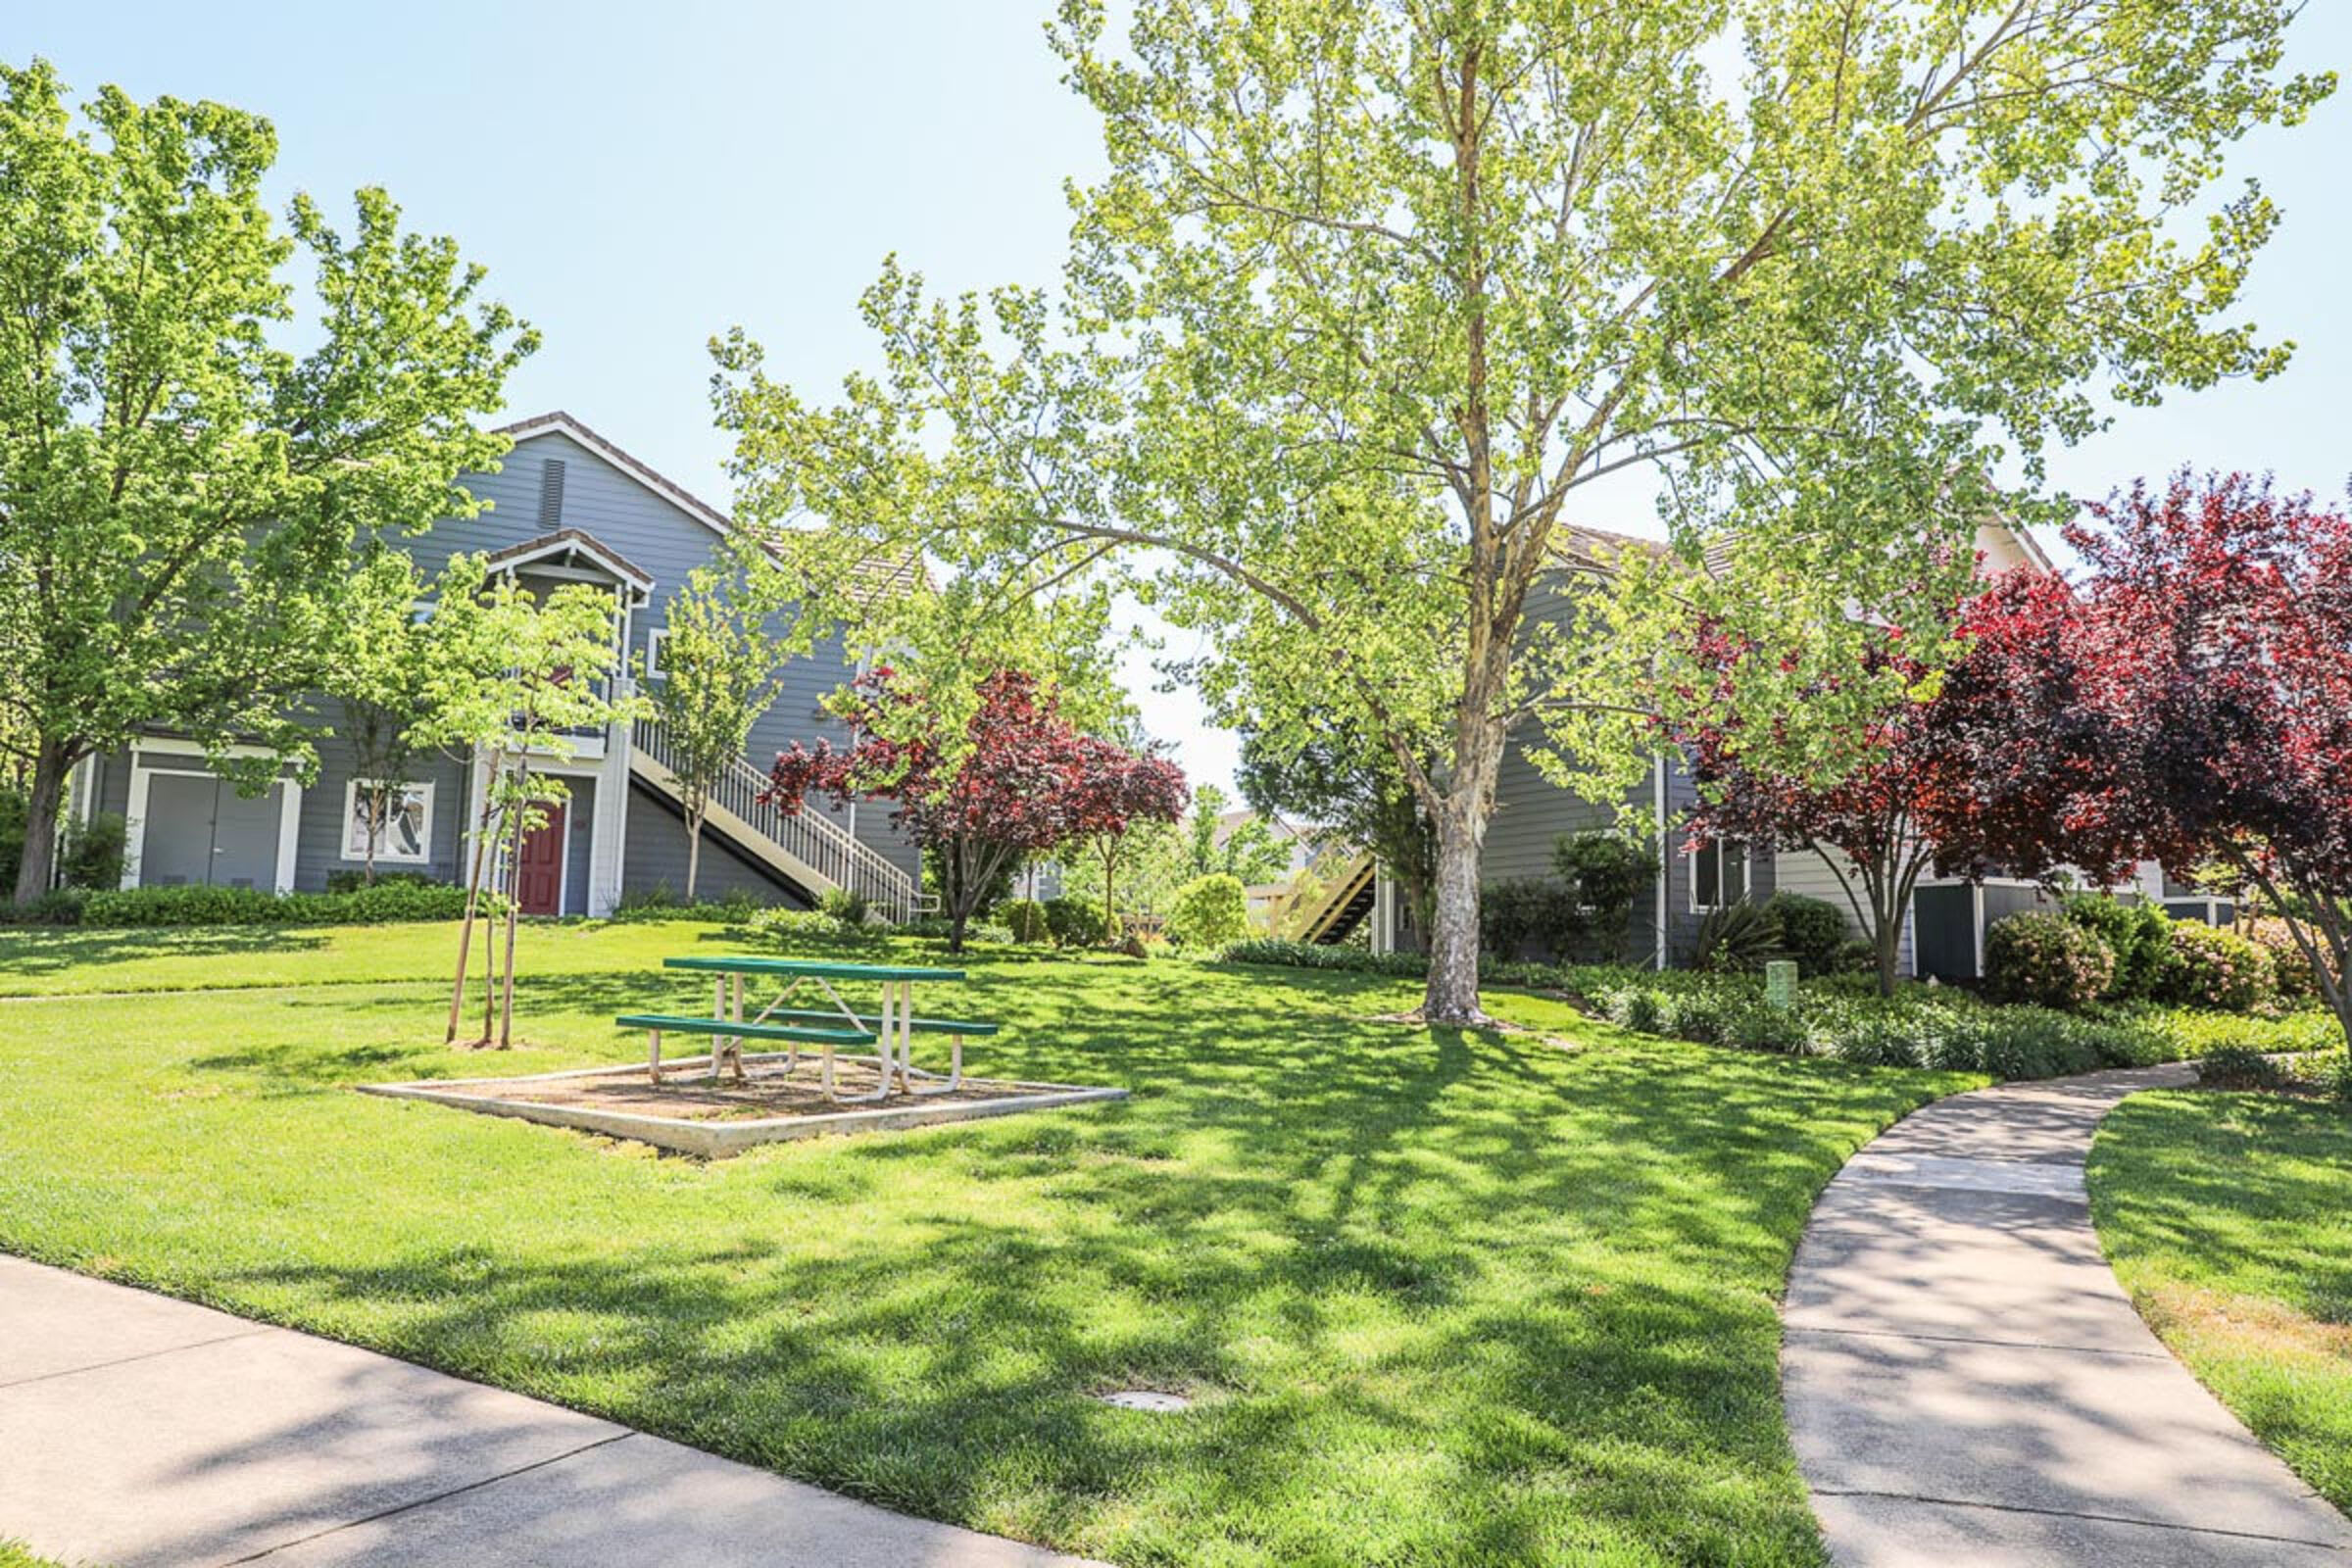 Pathway through the landscaped grounds at Rocklin Ranch Apartments in Rocklin, California